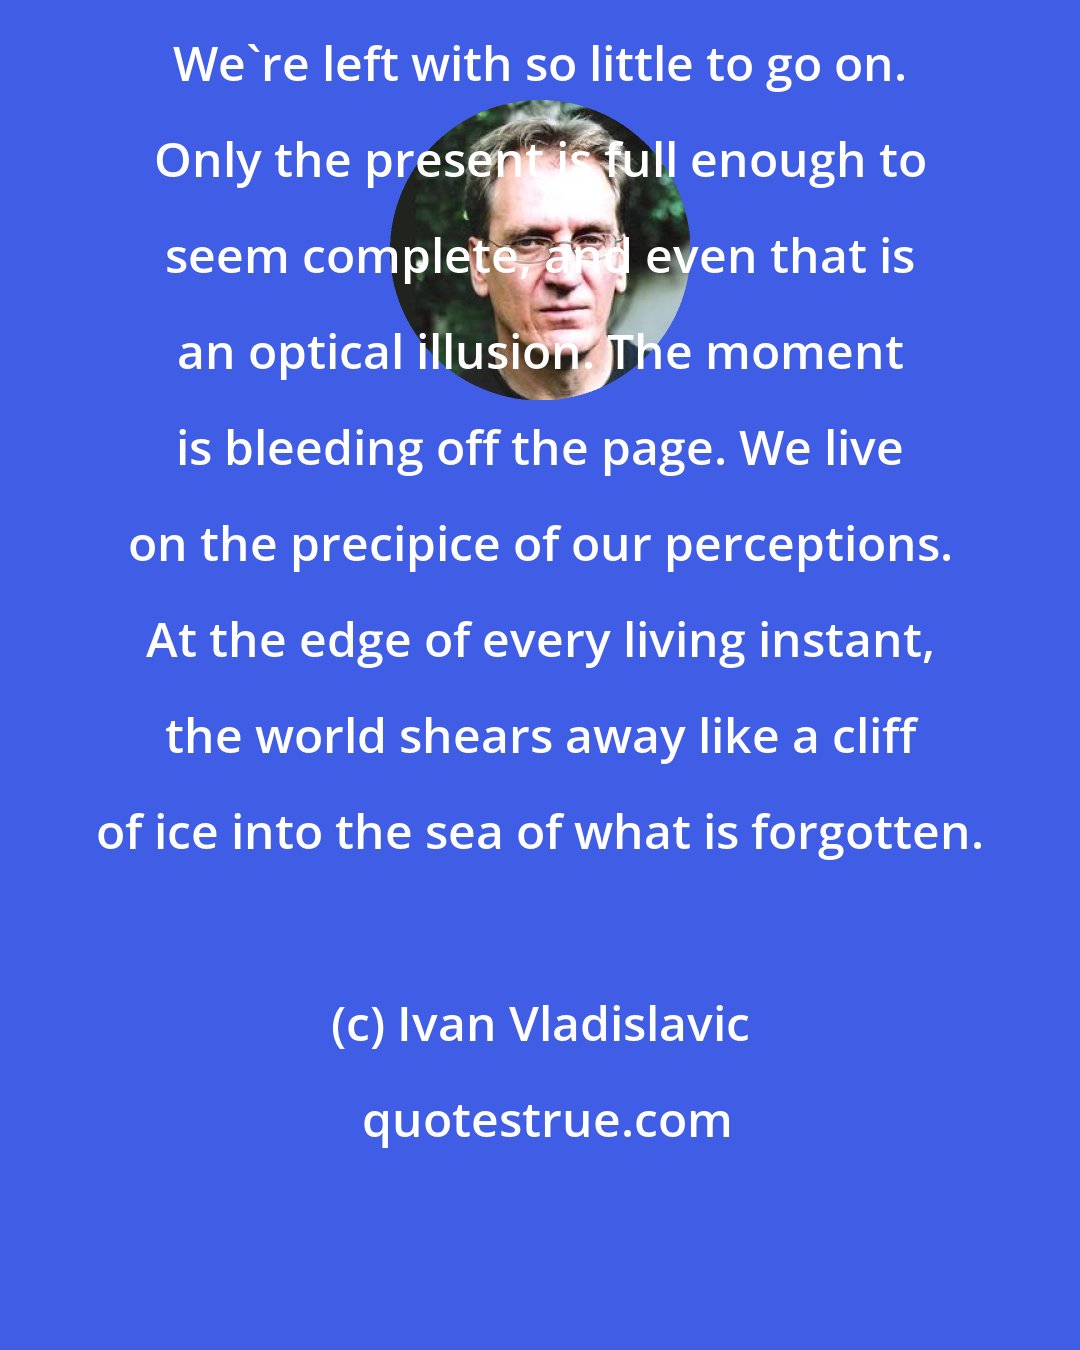 Ivan Vladislavic: We're left with so little to go on. Only the present is full enough to seem complete, and even that is an optical illusion. The moment is bleeding off the page. We live on the precipice of our perceptions. At the edge of every living instant, the world shears away like a cliff of ice into the sea of what is forgotten.